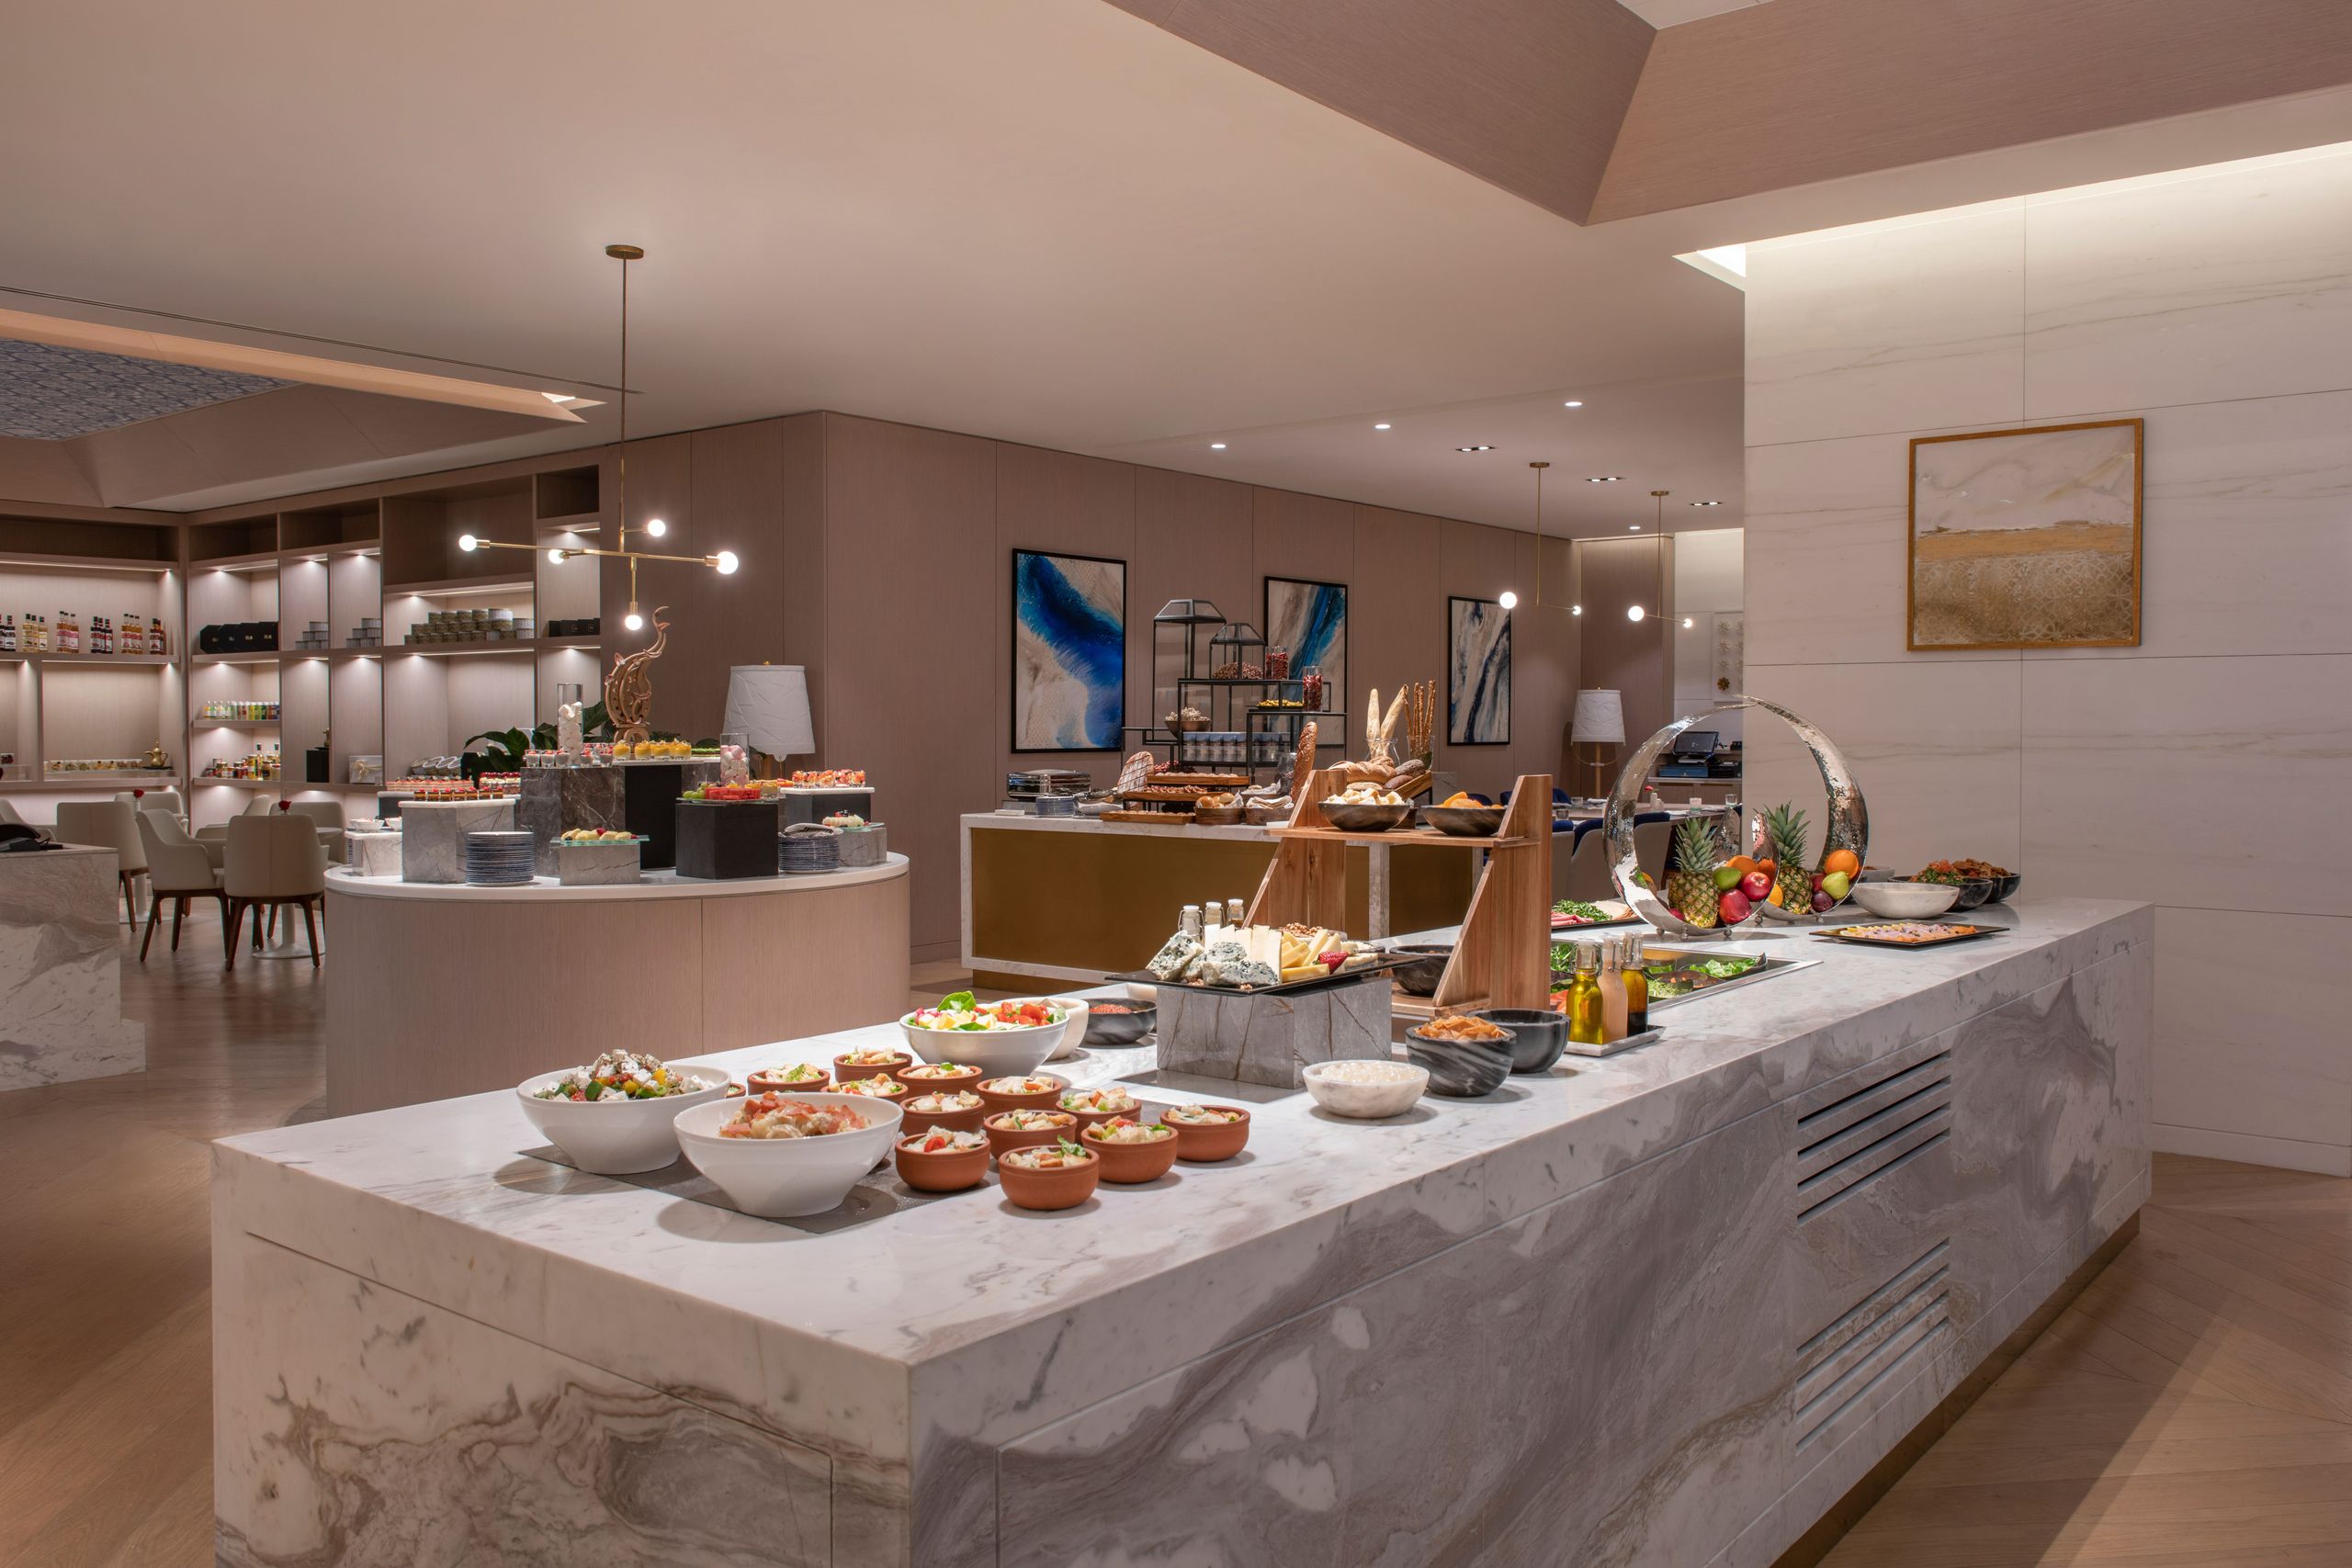 Hotel in Katar - Steigenberger Residence Doha - Crust Cafe and Bakery